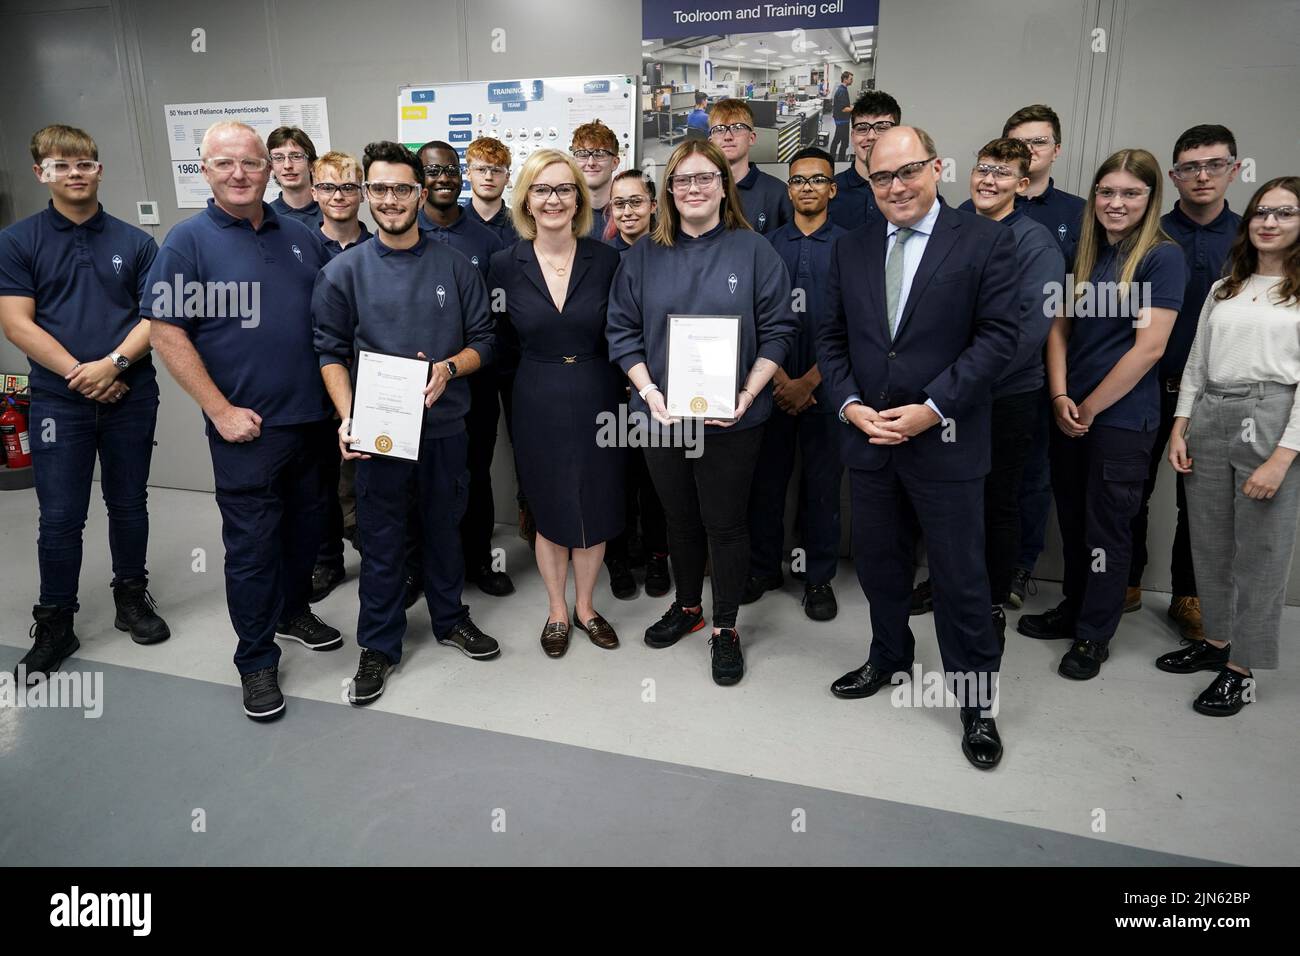 Britain's Conservative Party leadership candidate Liz Truss and British Defence Secretary Ben Wallace meet apprentices as they visit the Reliance Precision engineering company ahead of a hustings event later, in Huddersfield, Britain August 9, 2022. Ian Forsyth/Pool via REUTERS Stock Photo